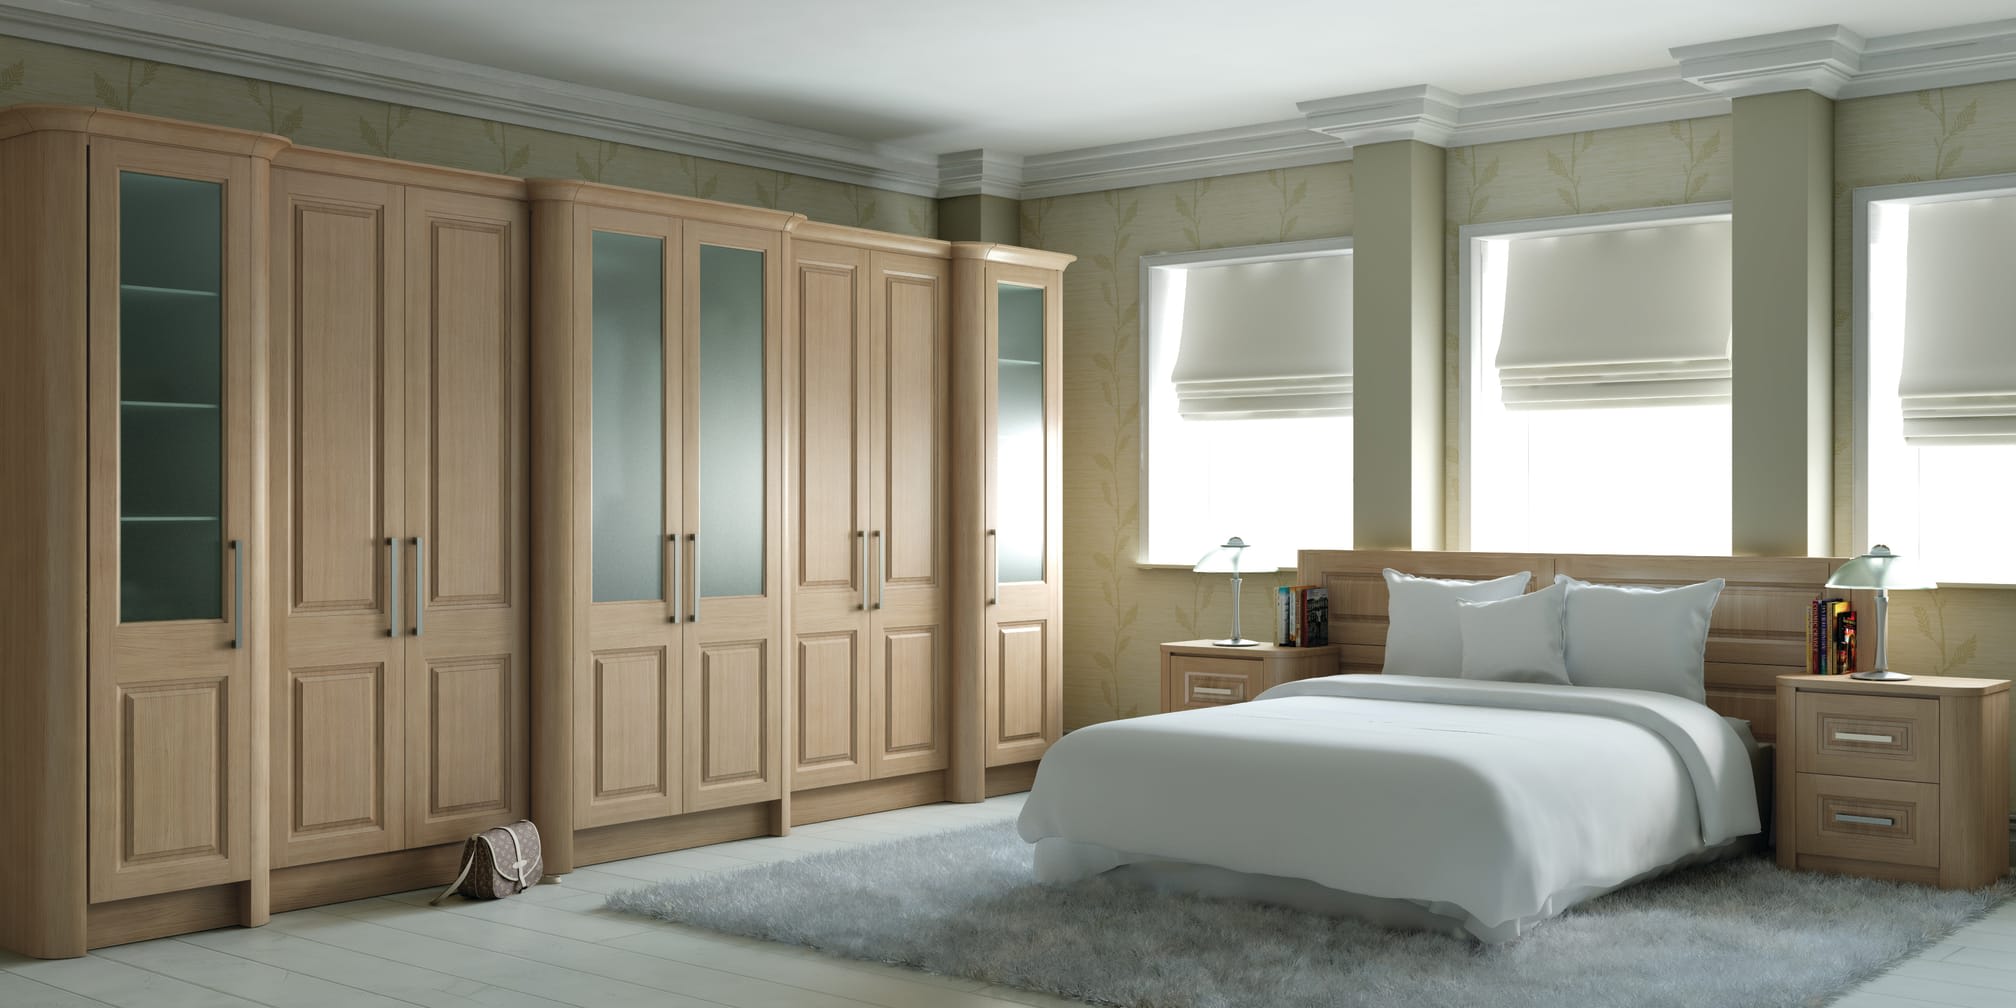 Langtry Fitted Furniture Ely 01353 725380